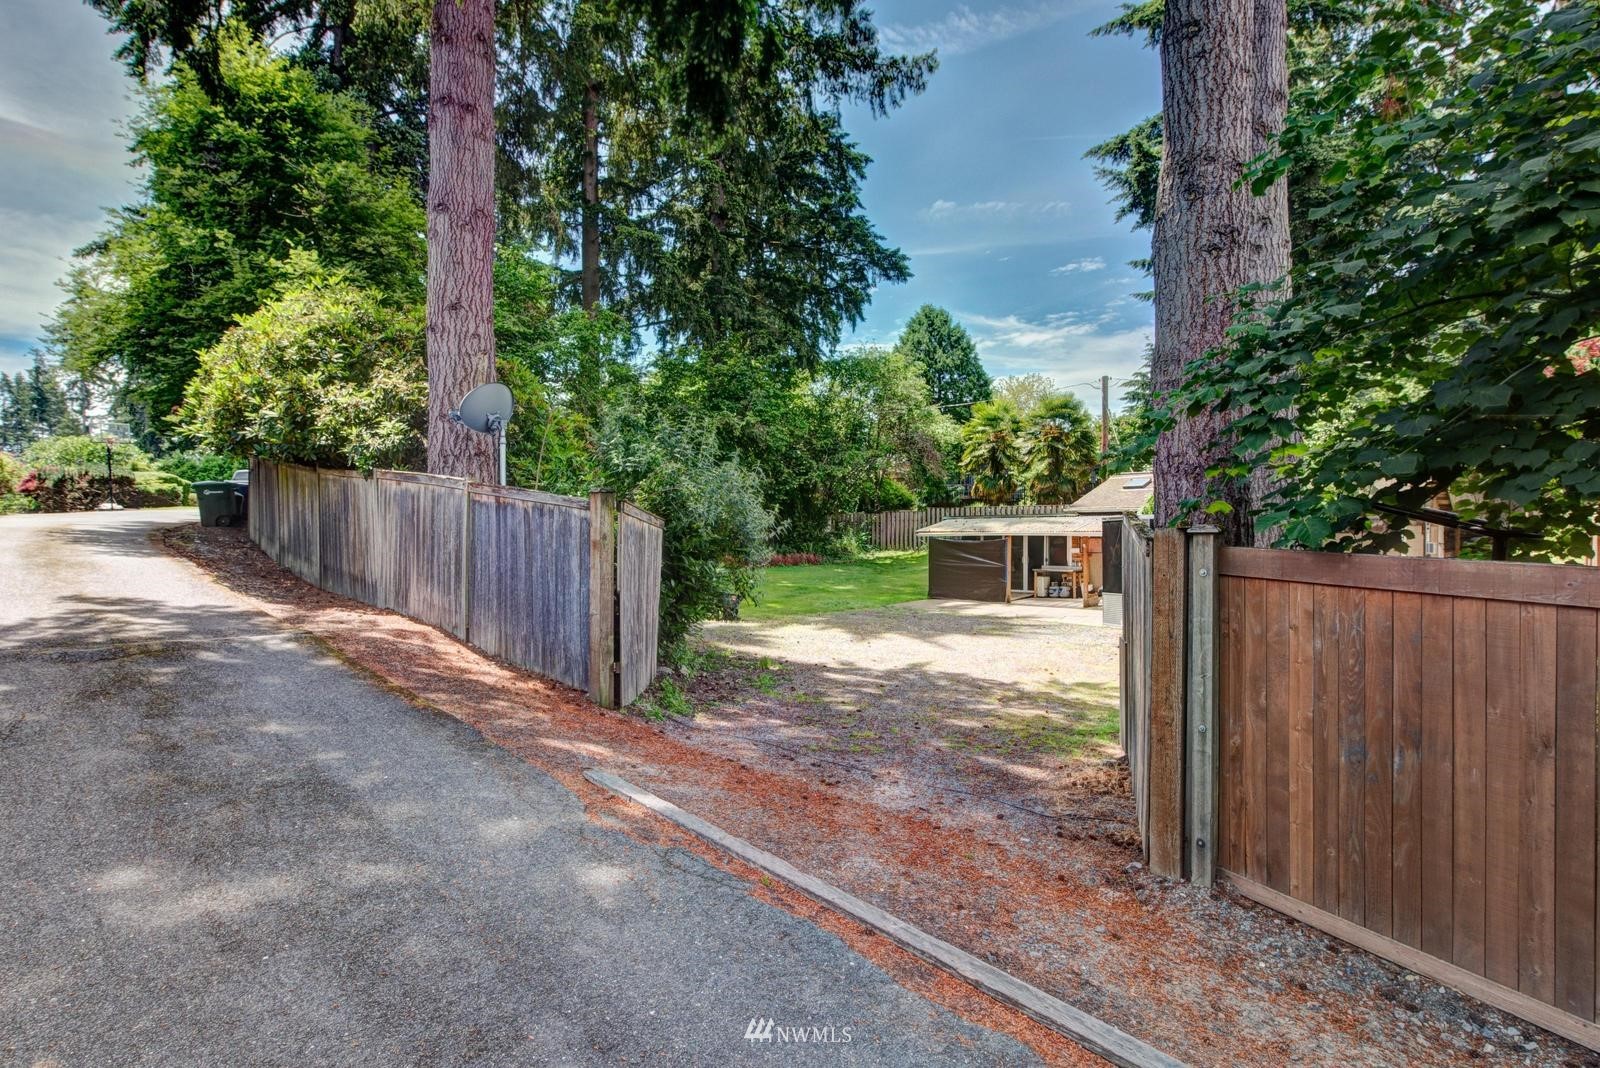 a view of a yard with wooden fence and trees